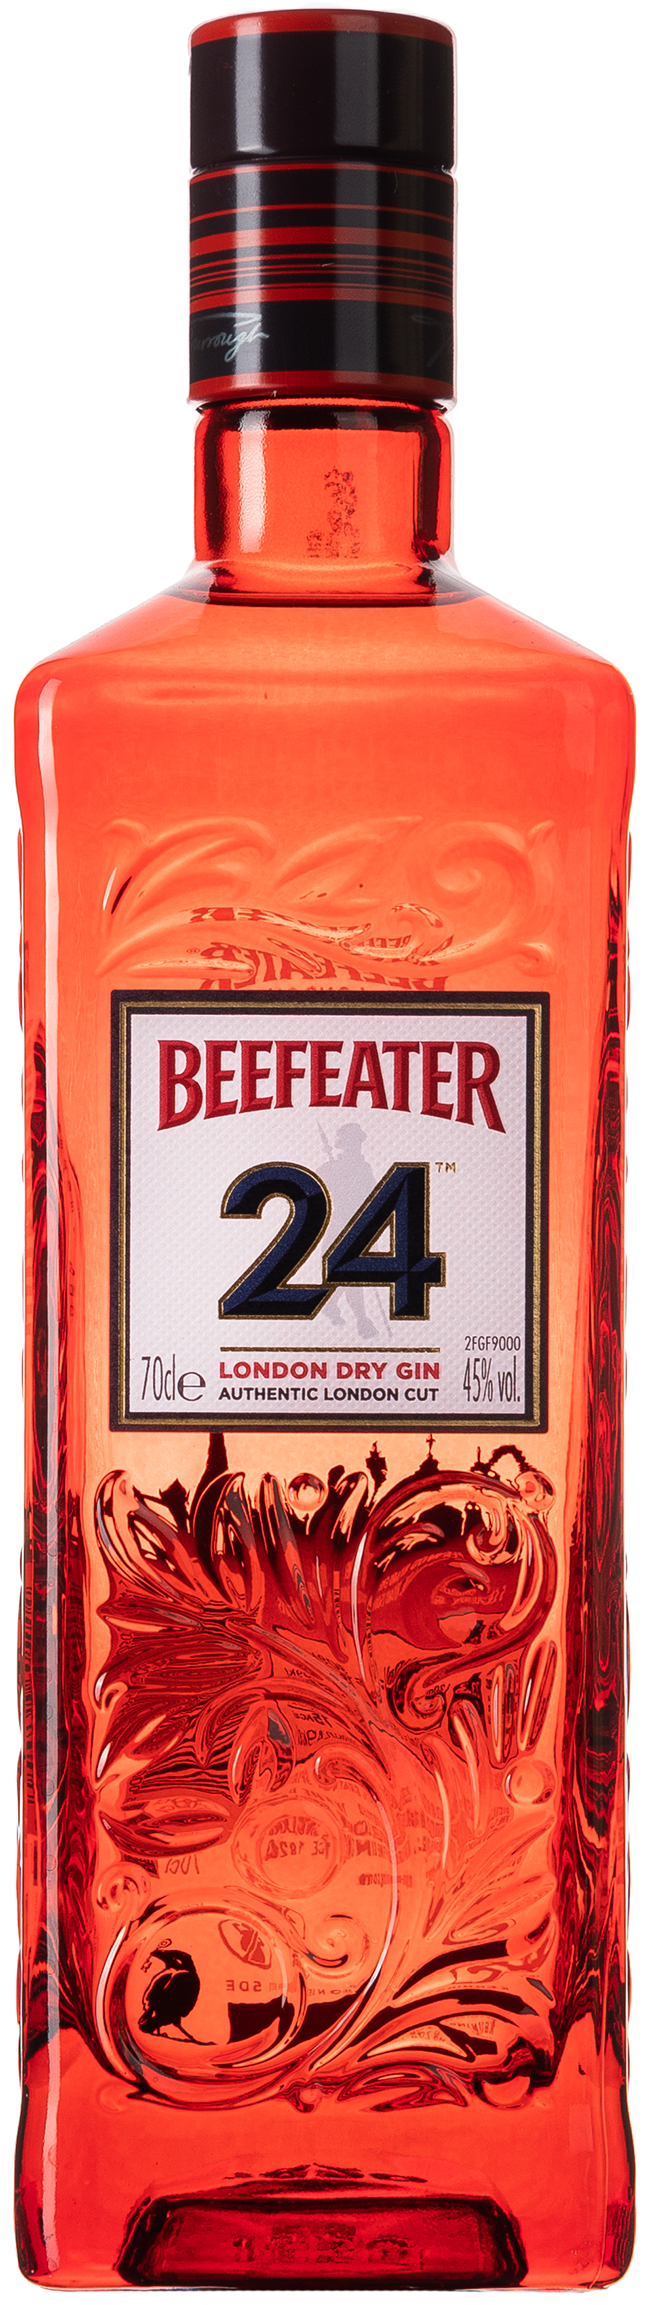 Beefeater 24 London Dry Gin 45% vol. 0,7L